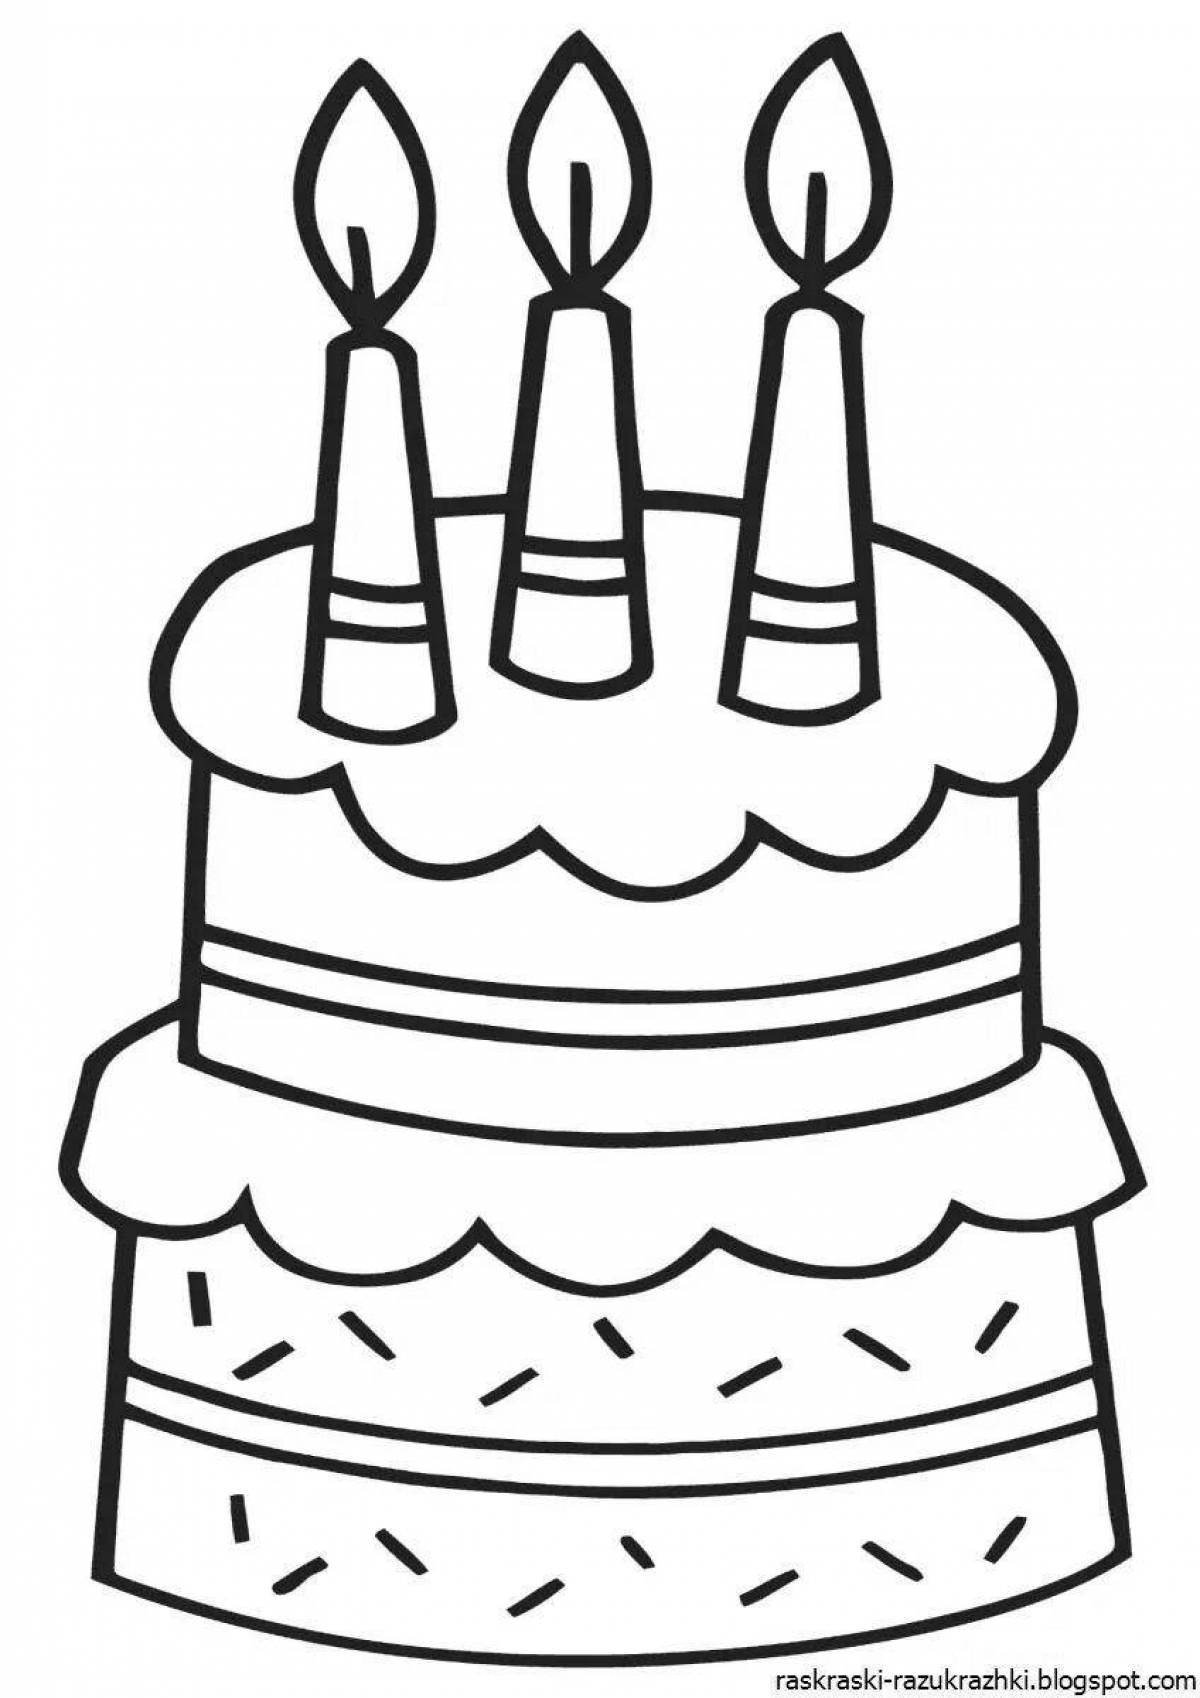 Adorable cake coloring book for 3-4 year olds